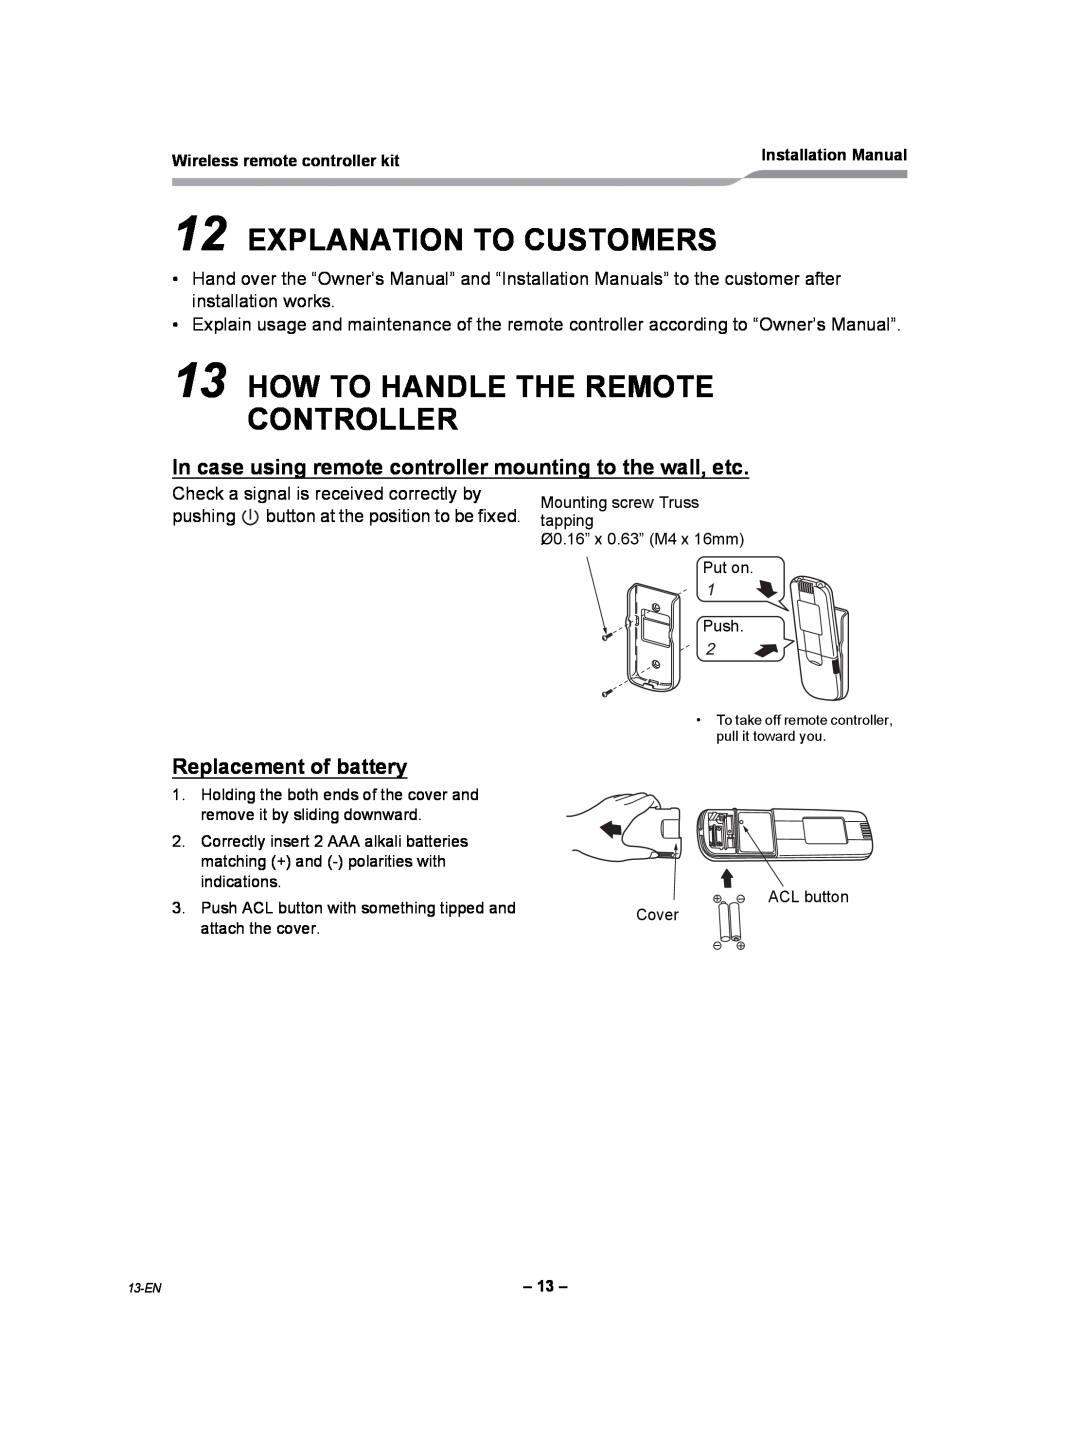 Toshiba TCB-AX21UL Explanation To Customers, How To Handle The Remote Controller, Replacement of battery 